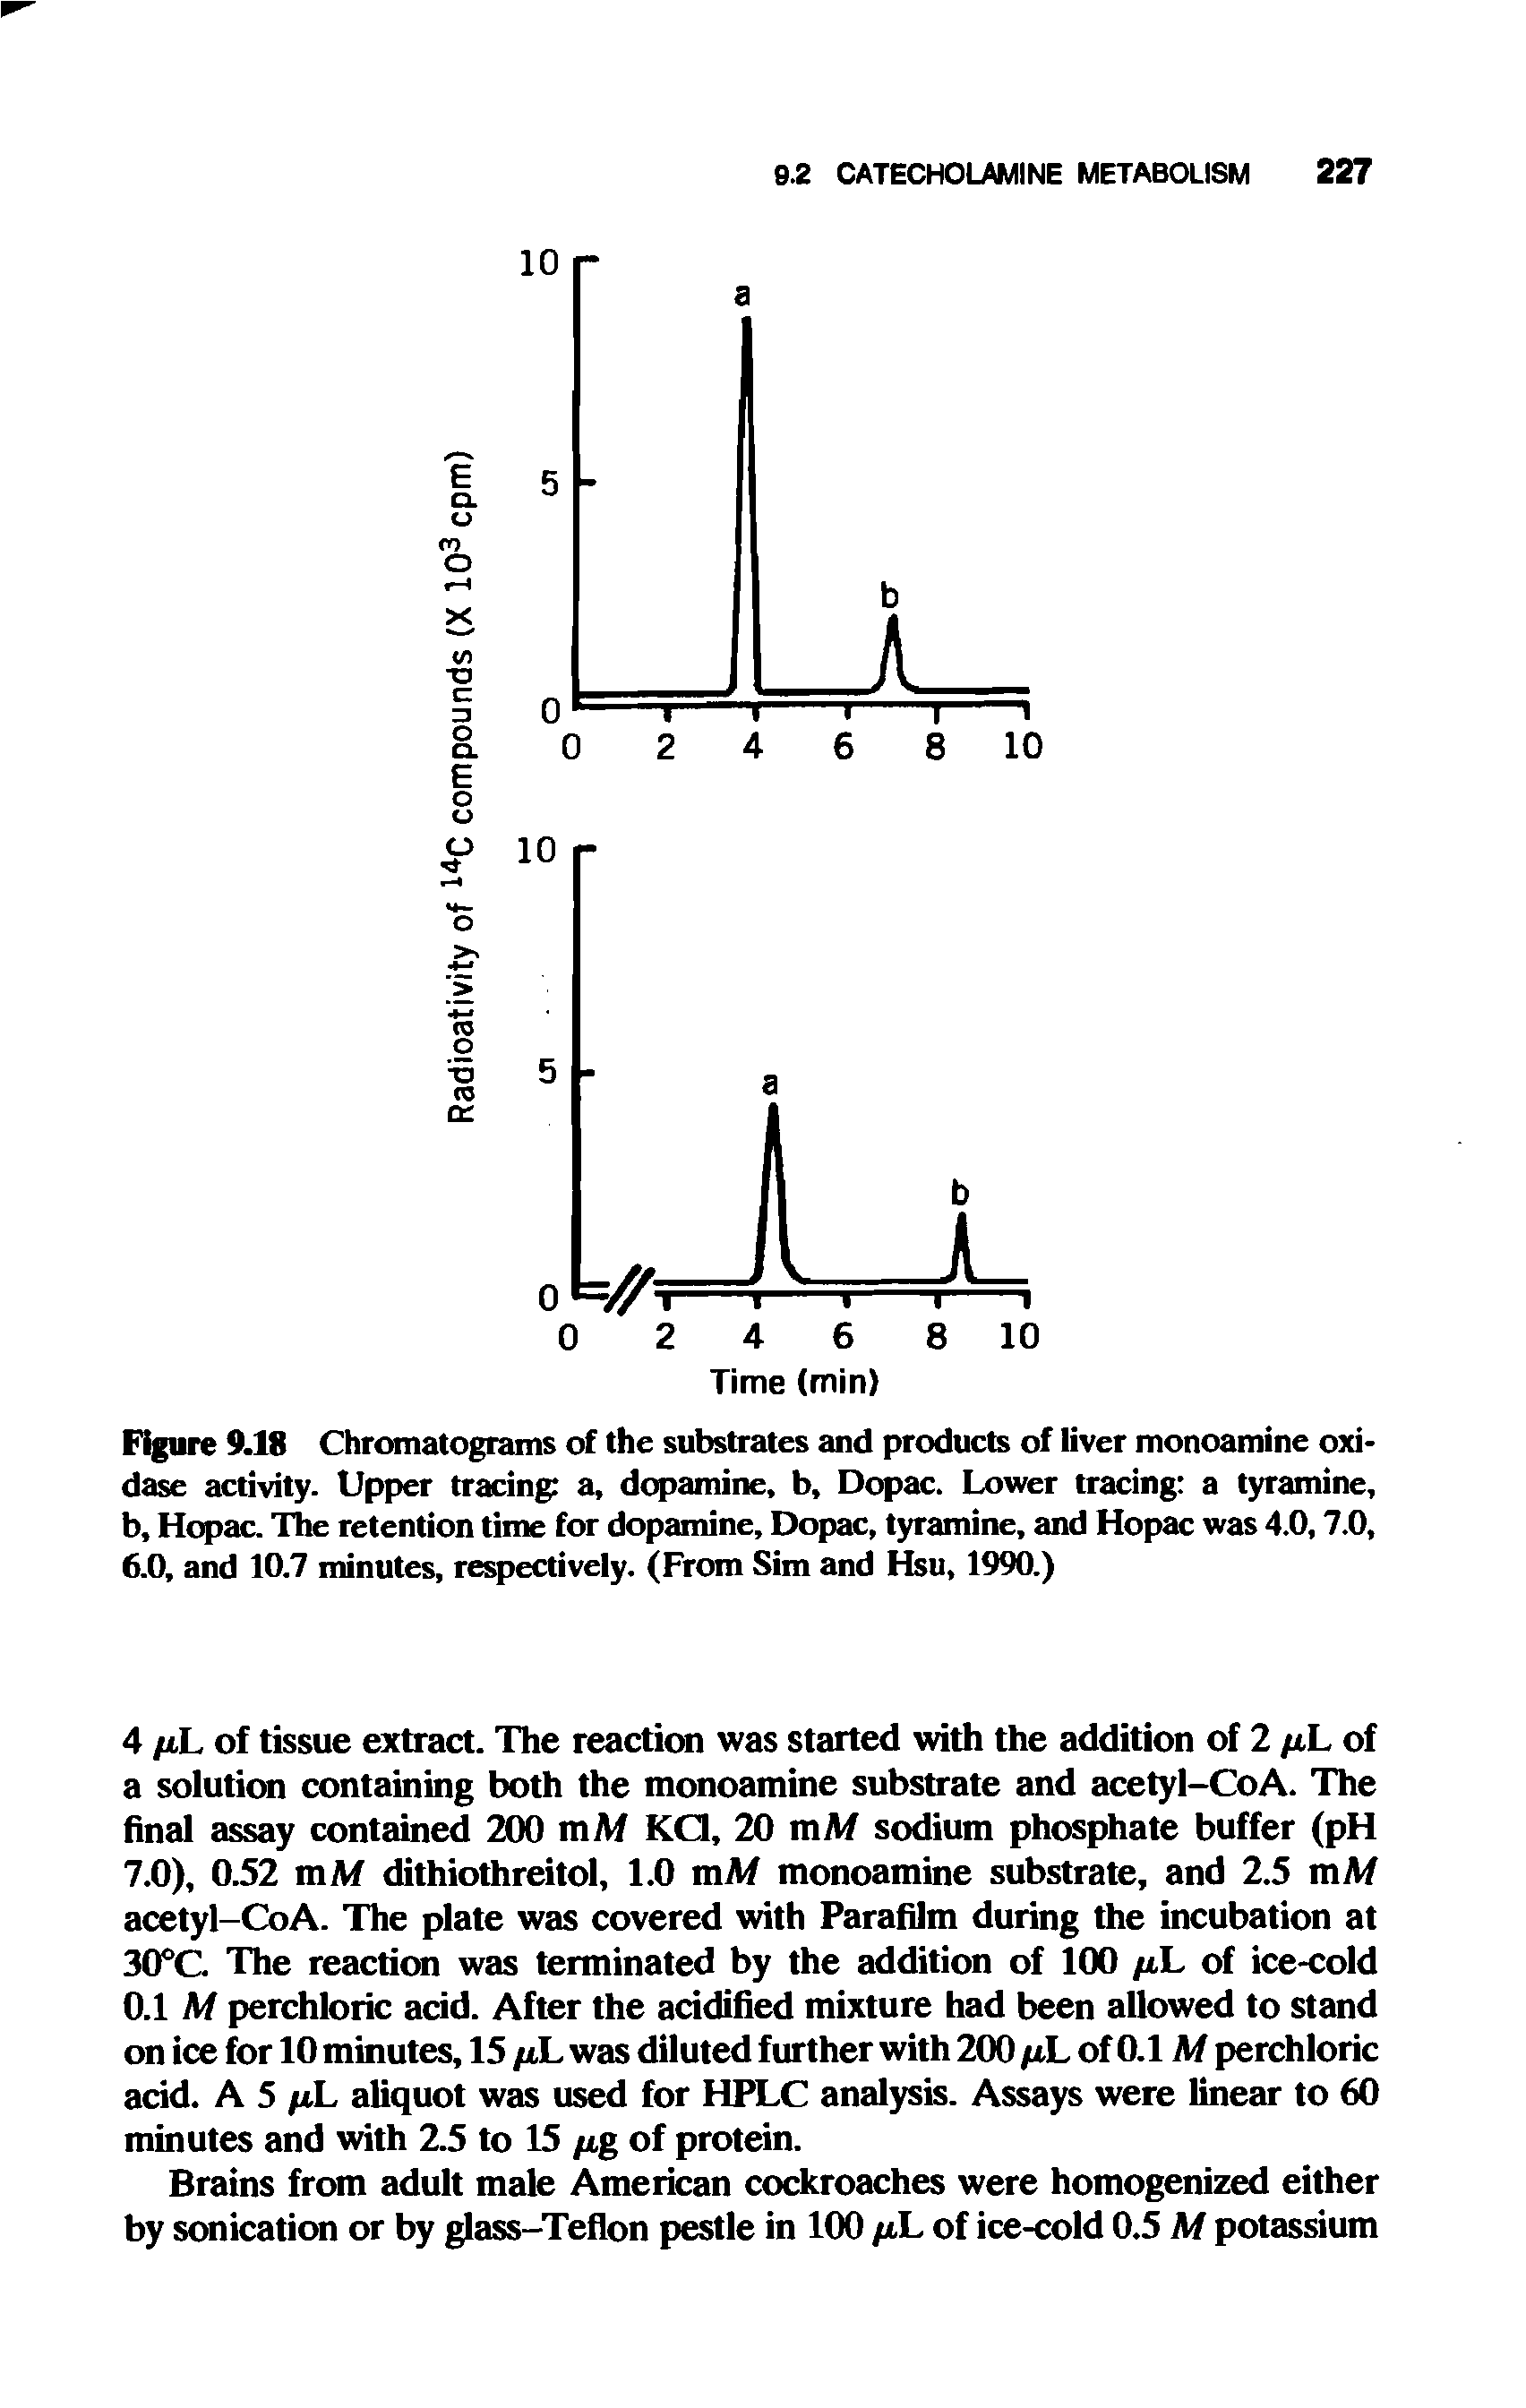 Figure 9.18 Chromatograms of the substrates and products of liver monoamine oxidase activity. Upper tracing a, dopamine, b, Dopac. Lower tracing a tyramine, b, Hopac. The retention time for dopamine, Dopac, tyramine, and Hopac was 4.0,7.0, 6.0, and 10.7 minutes, respectively. (From Sim and Hsu, 1990.)...